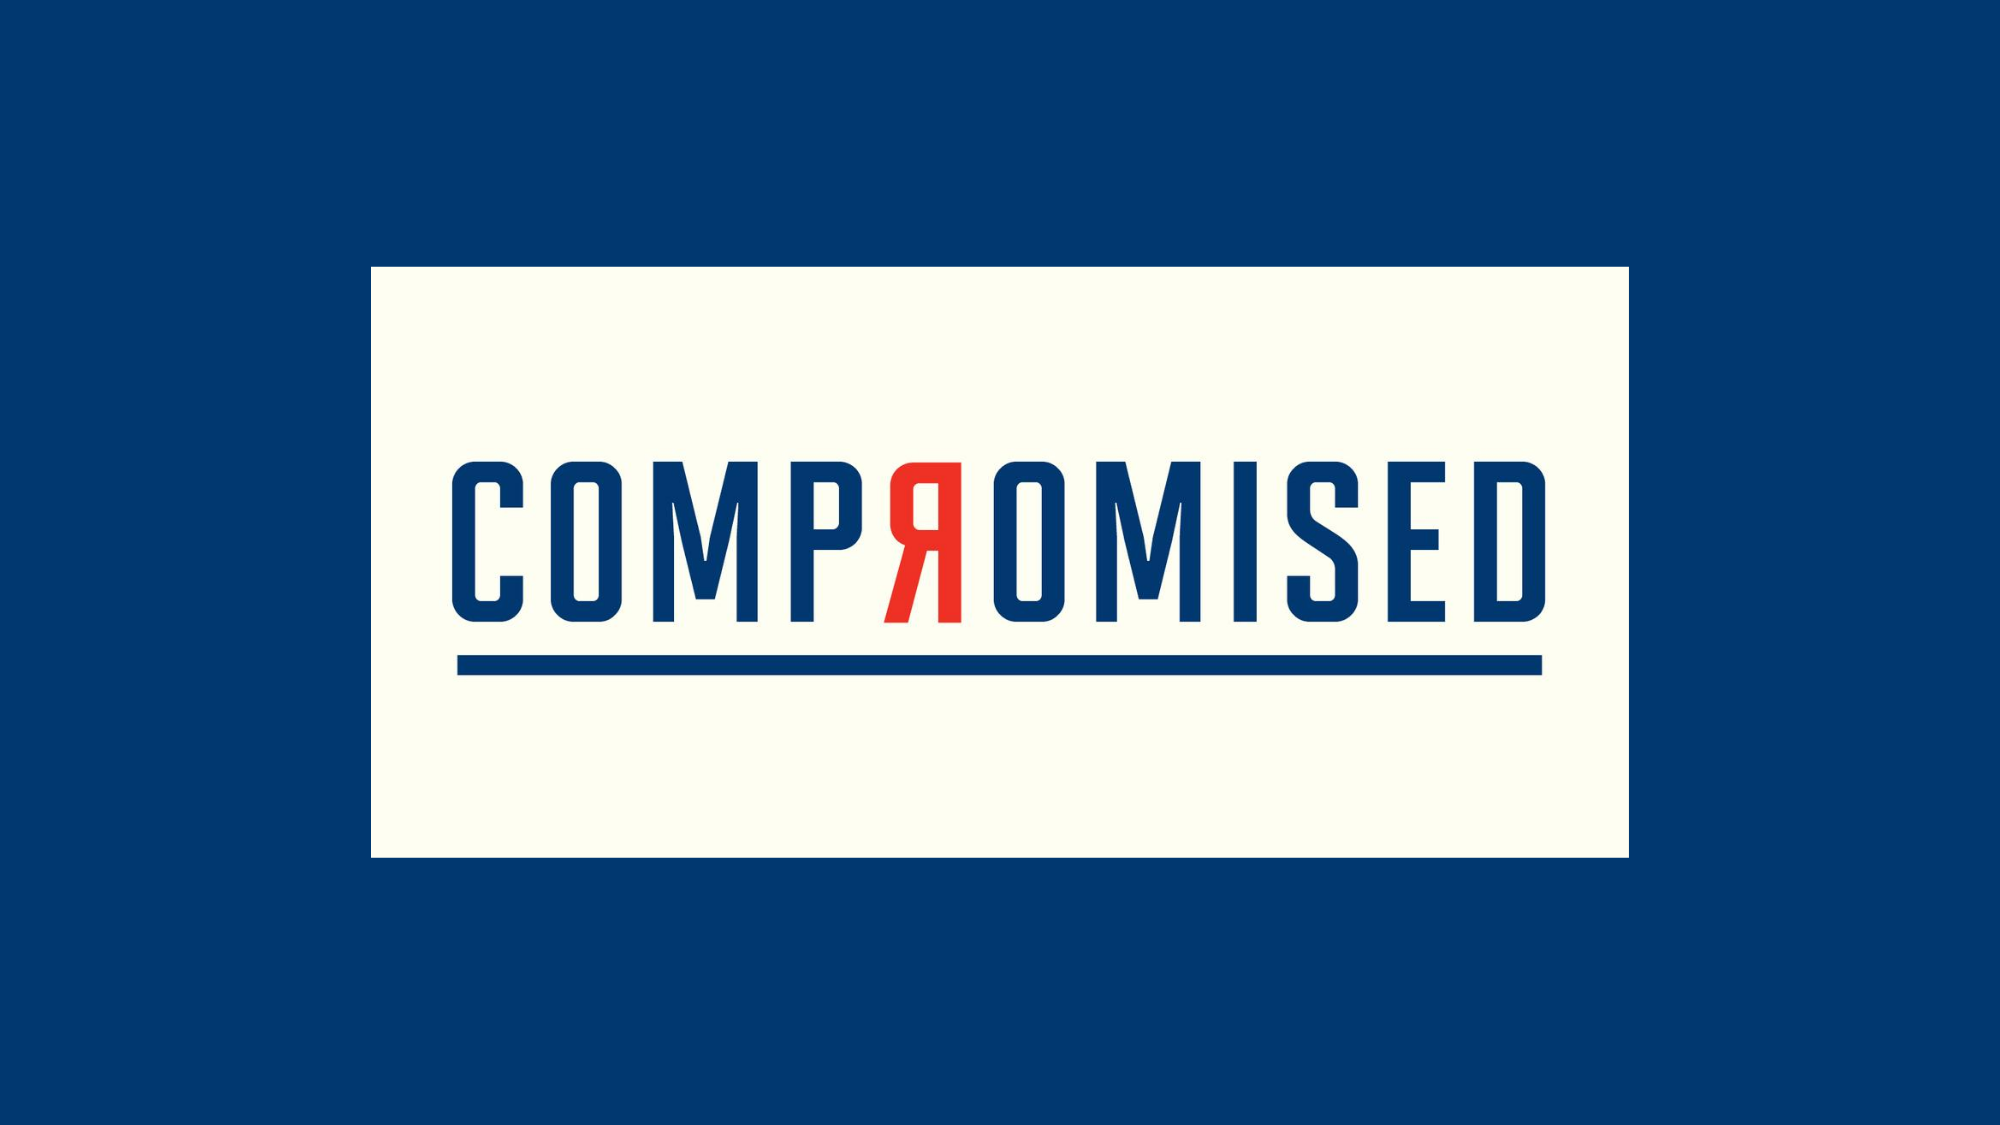 Banner reading &quot;COMPROMISED&quot;; the letter R is backwards and in red